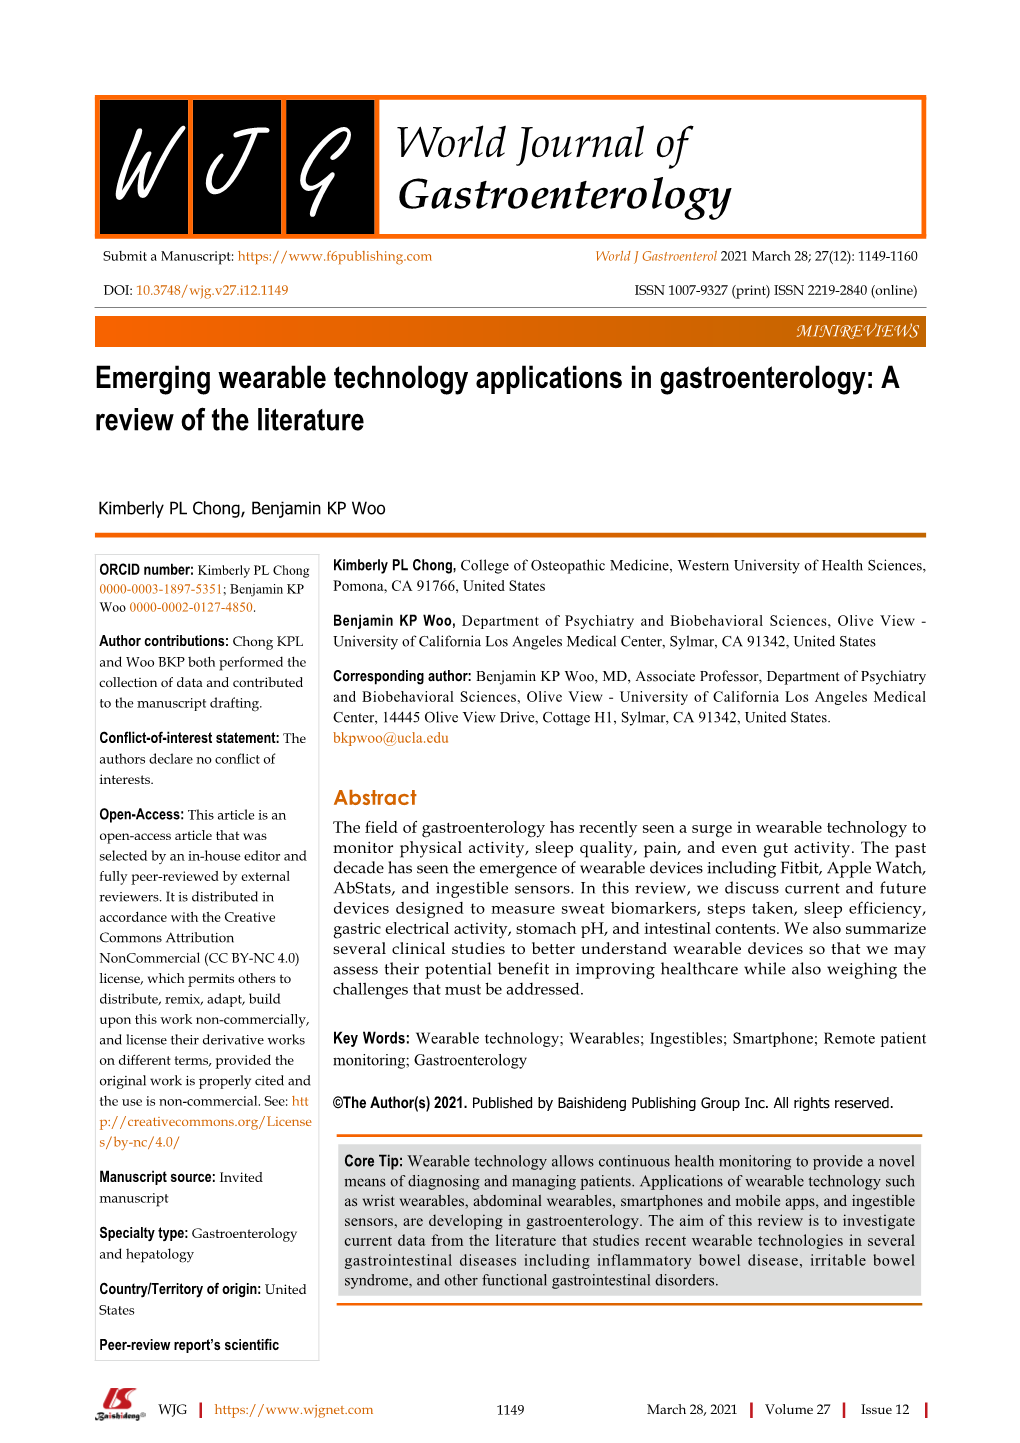 Emerging Wearable Technology Applications in Gastroenterology: a Review of the Literature